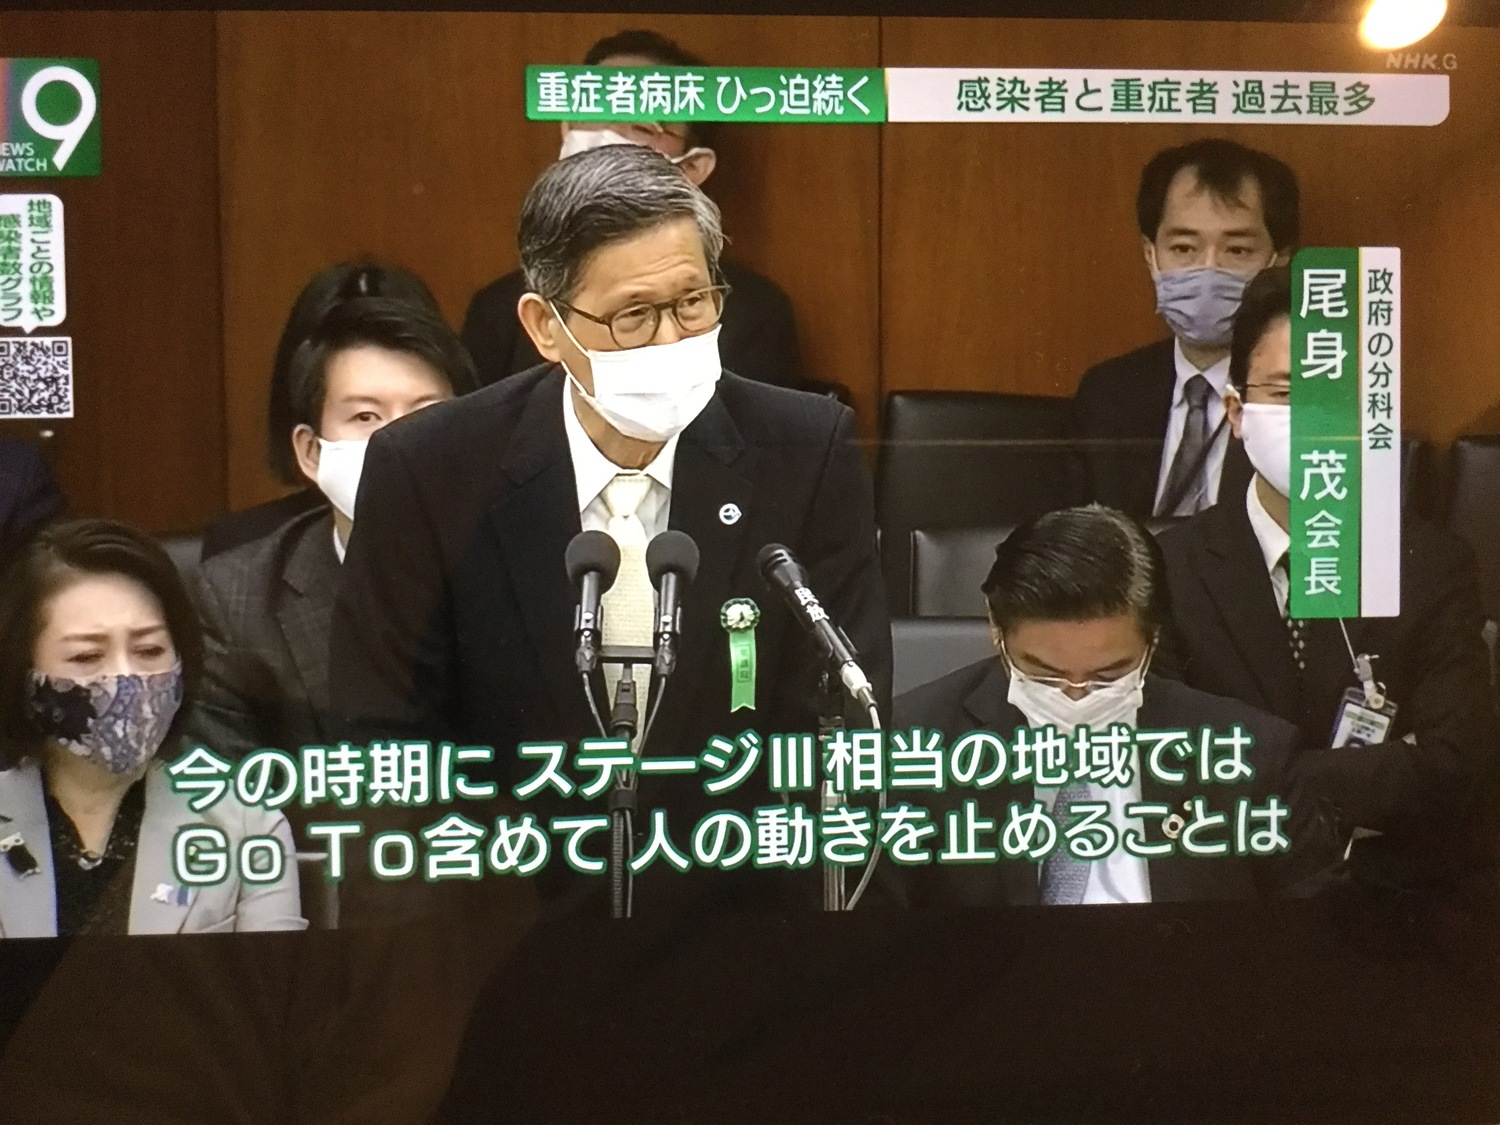 Even Shigeru Ominami, the head of the Japanese government's highest COVID-19 response organization subcommittee, also publicly demanded that they be detained.  Image: taken from NHK